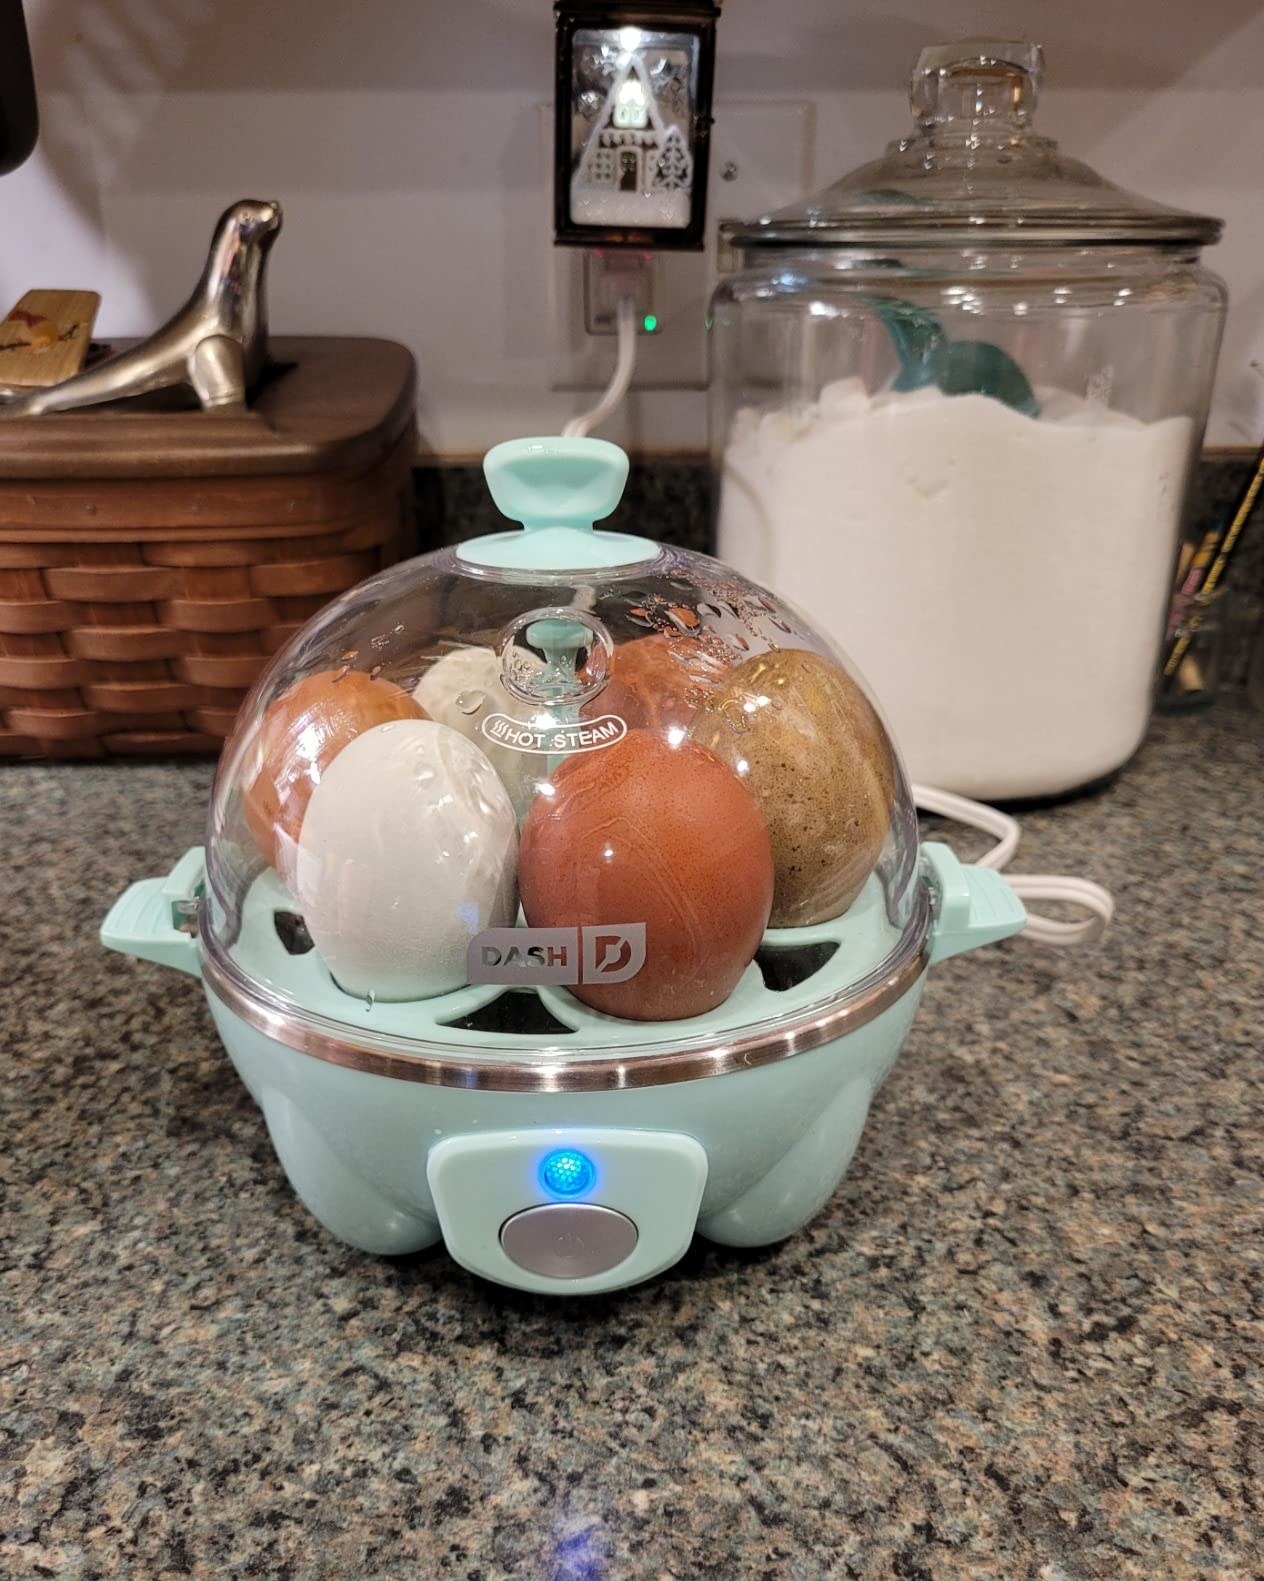 Reviewer image of the blue egg cooker